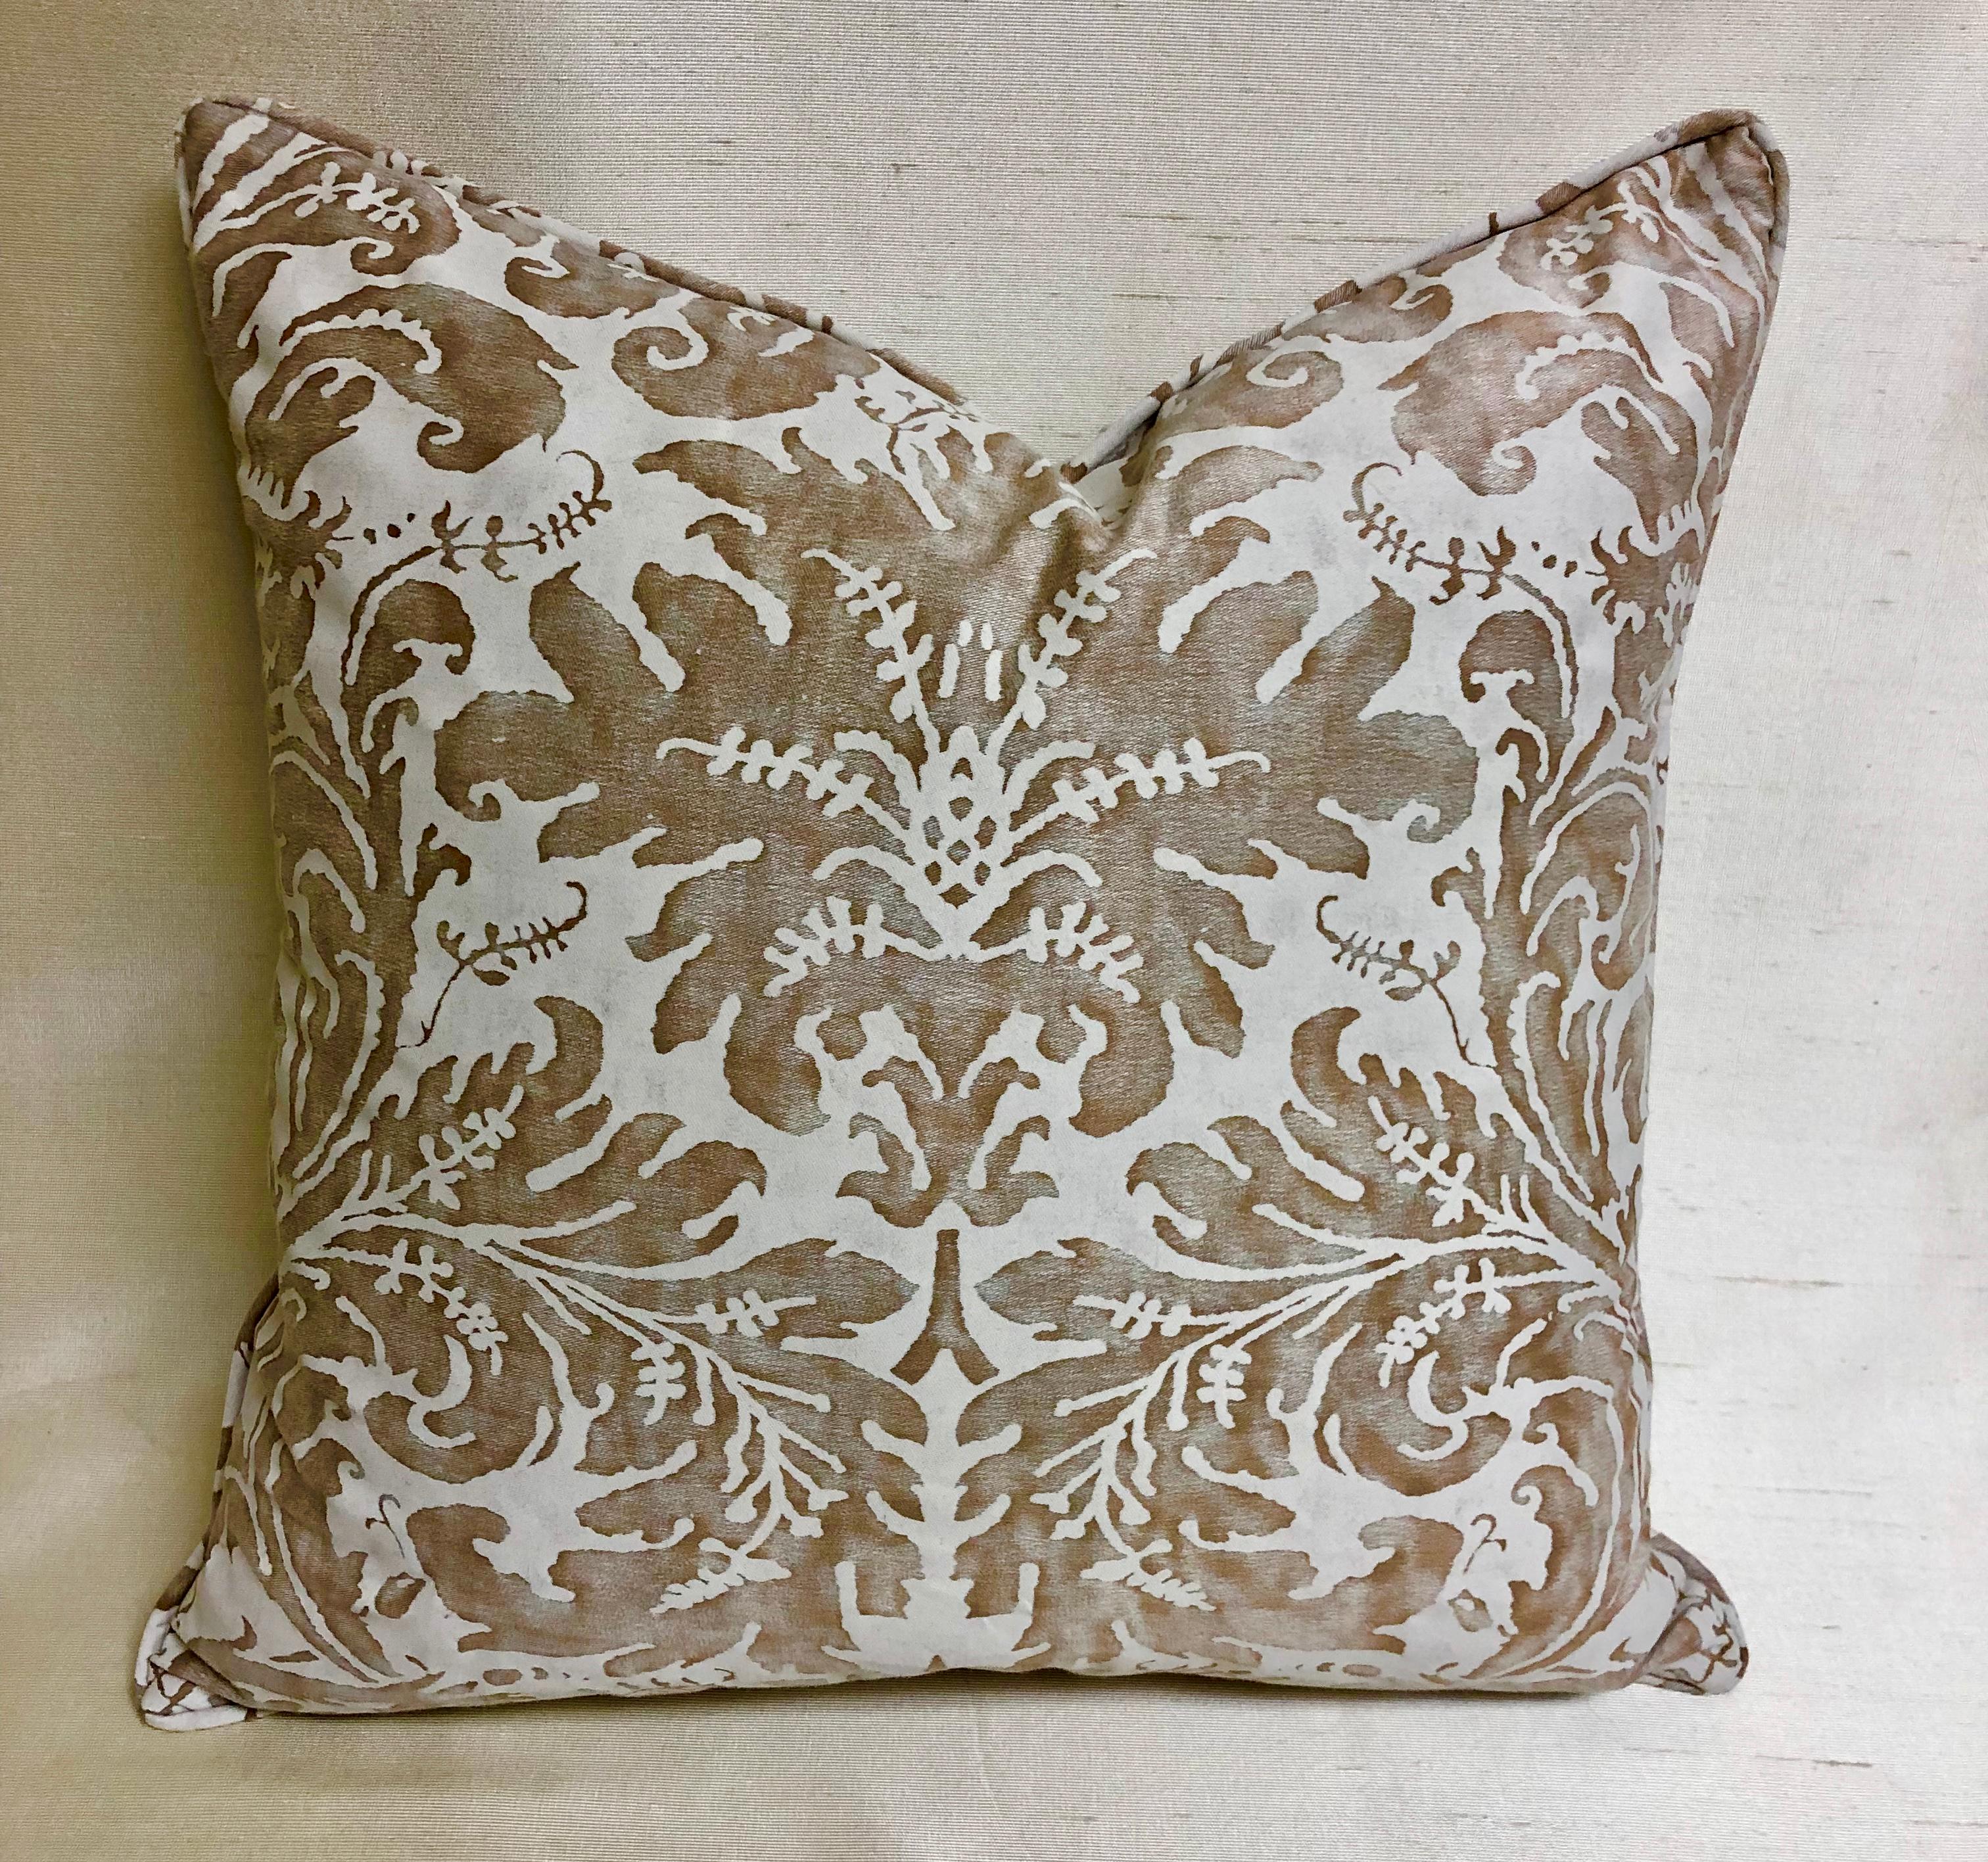 Decorative pair of down-filled Fortuny cushions in the 